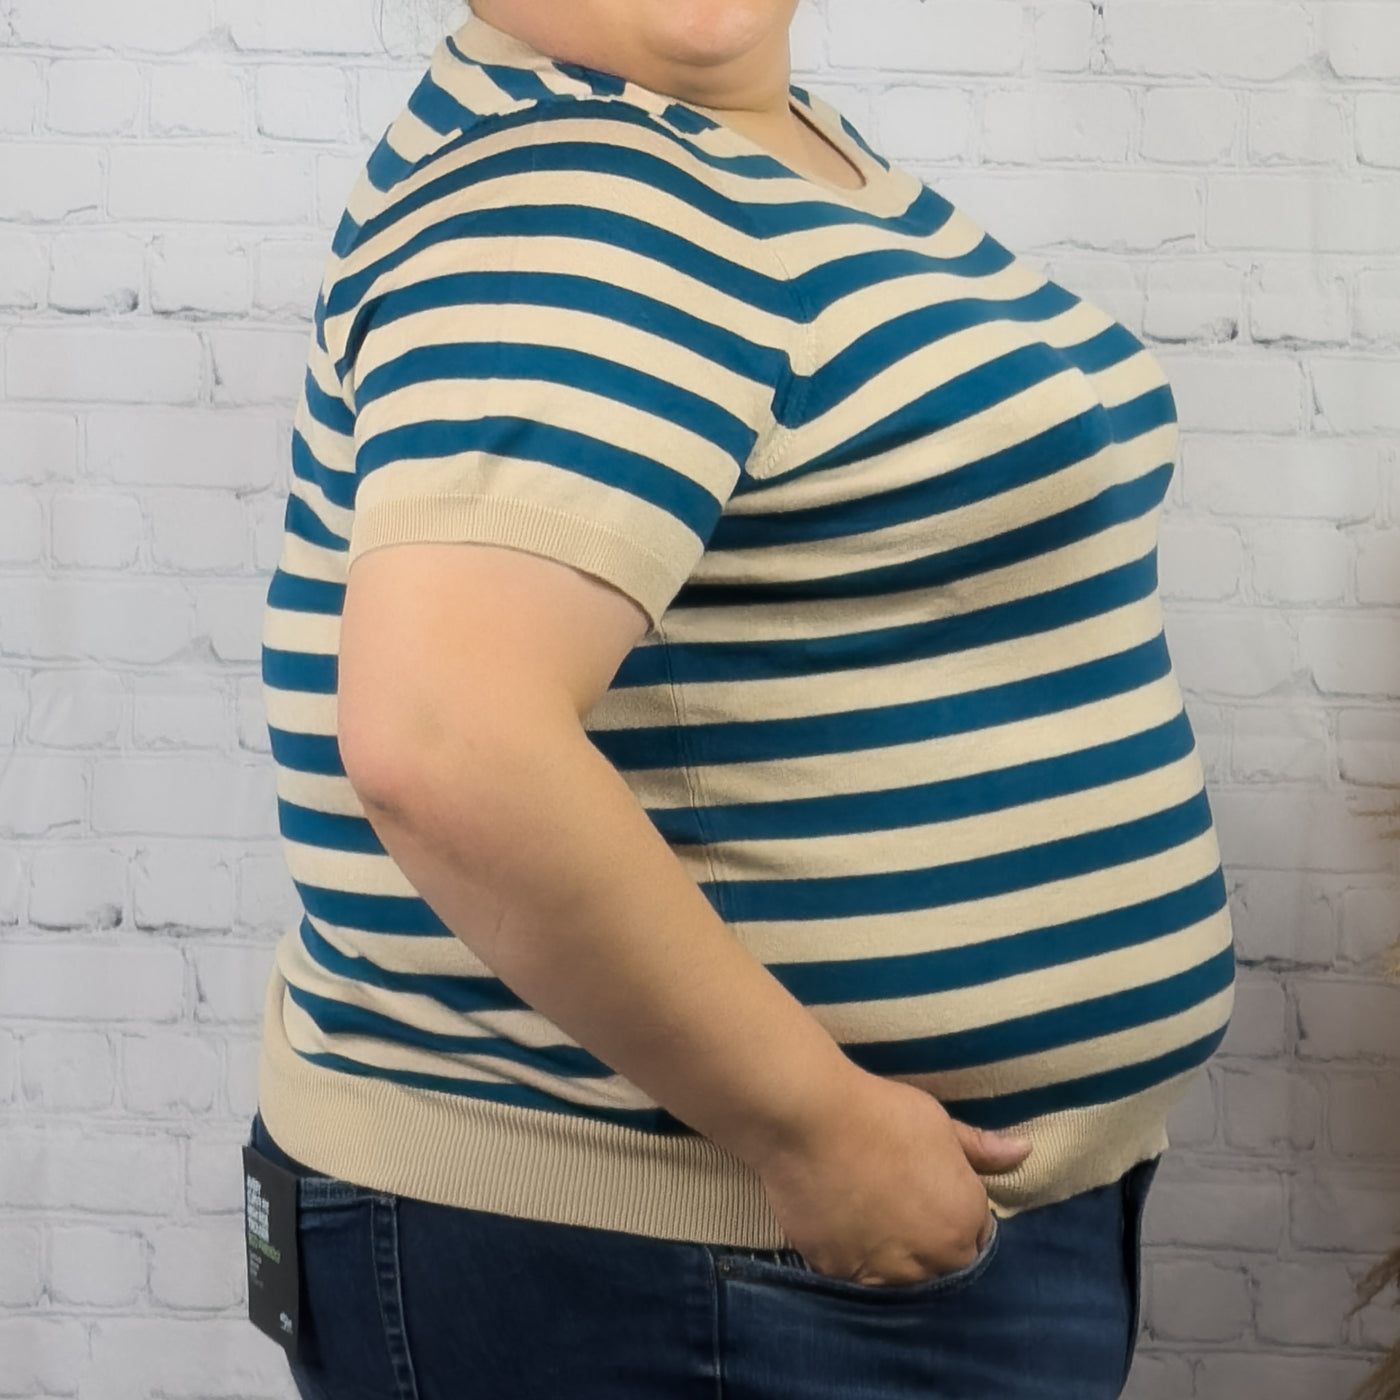 Plus sized striped knit short sleeved sweater 